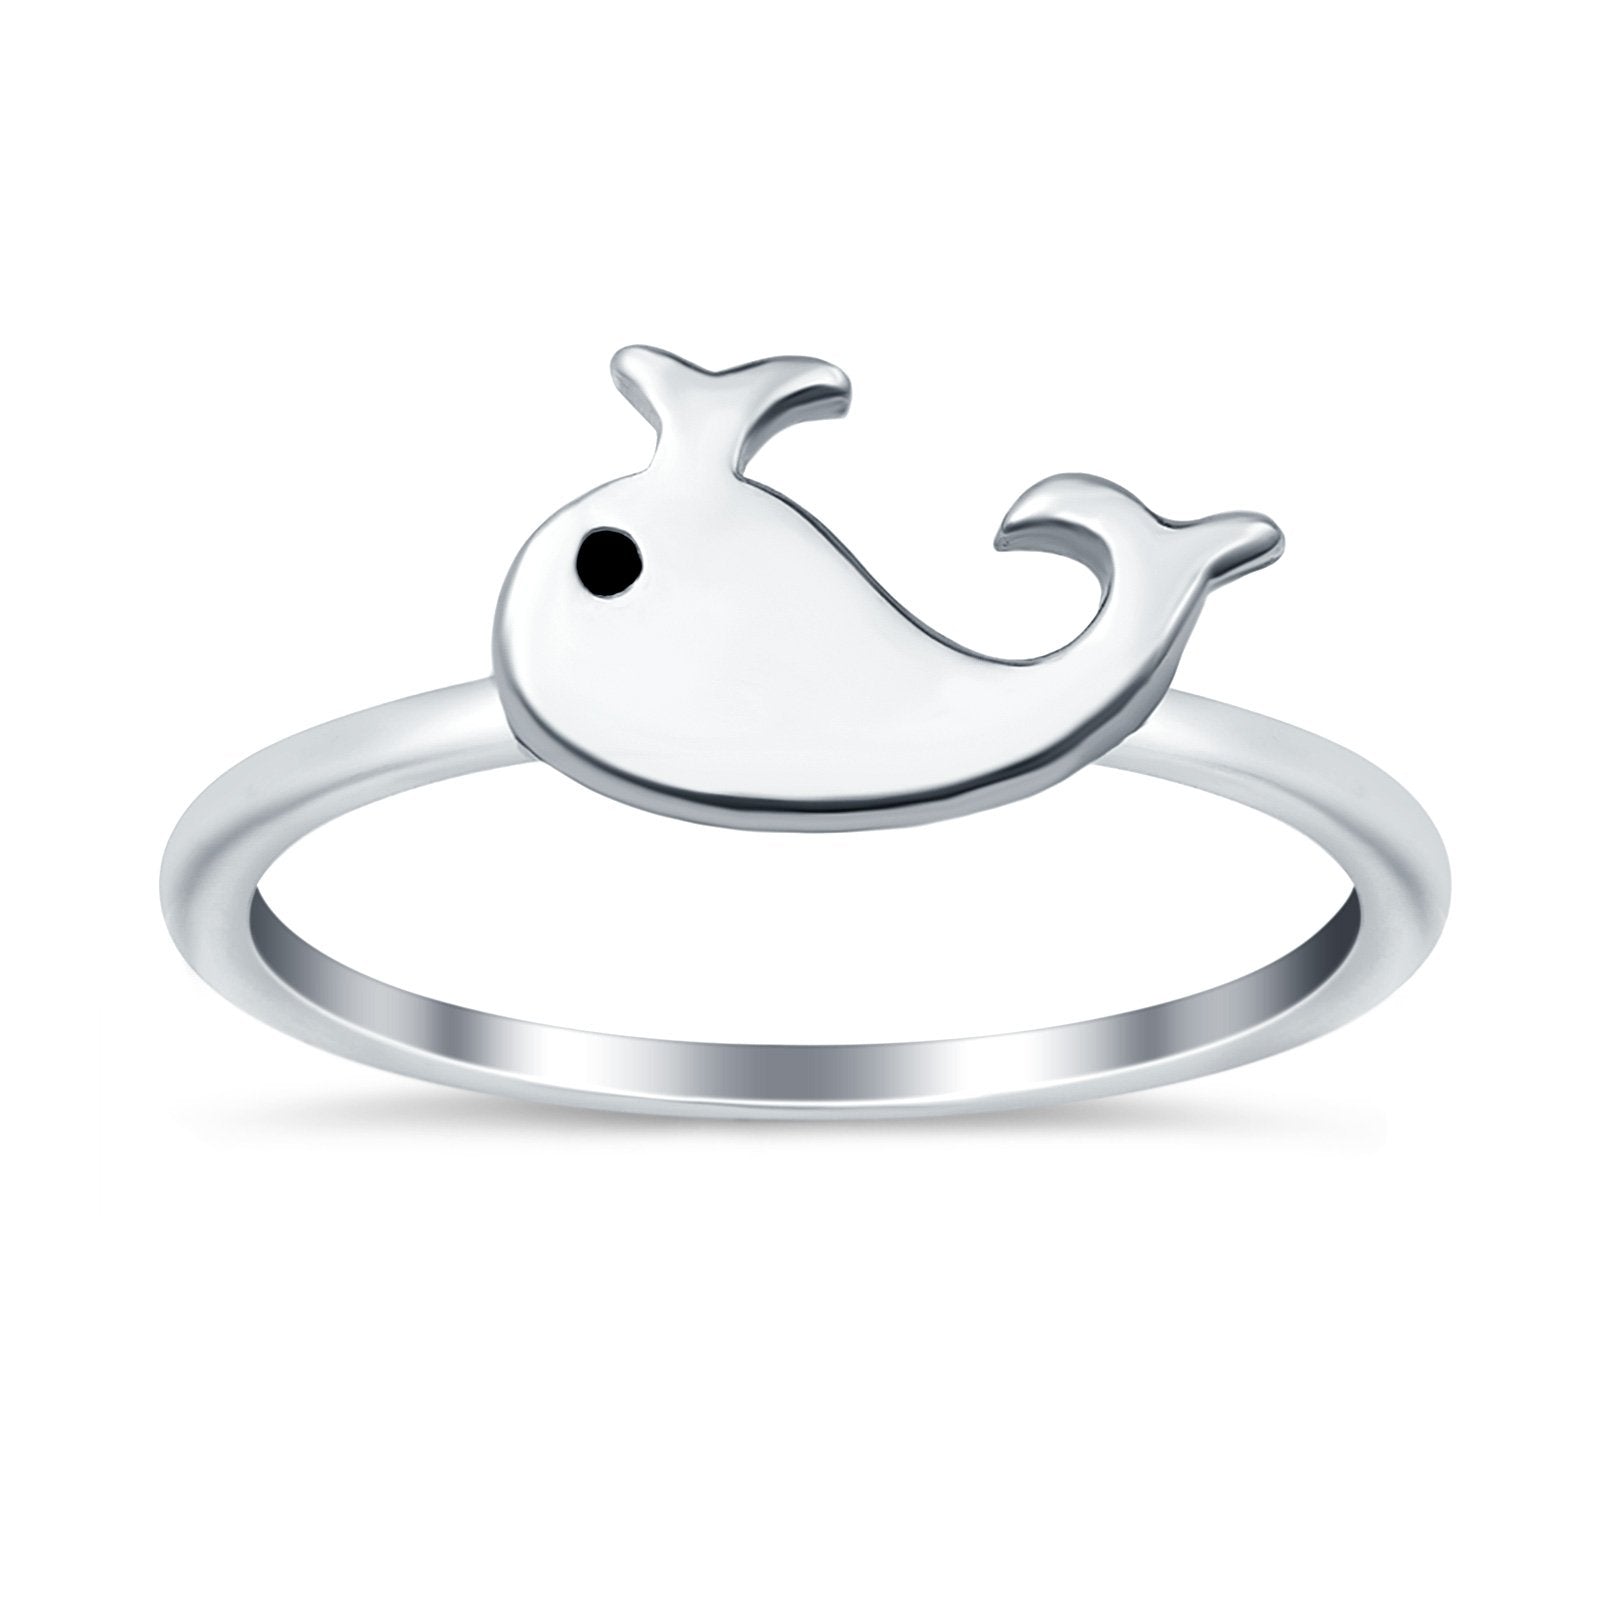 Whale Plain Ring Band 925 Sterling Silver